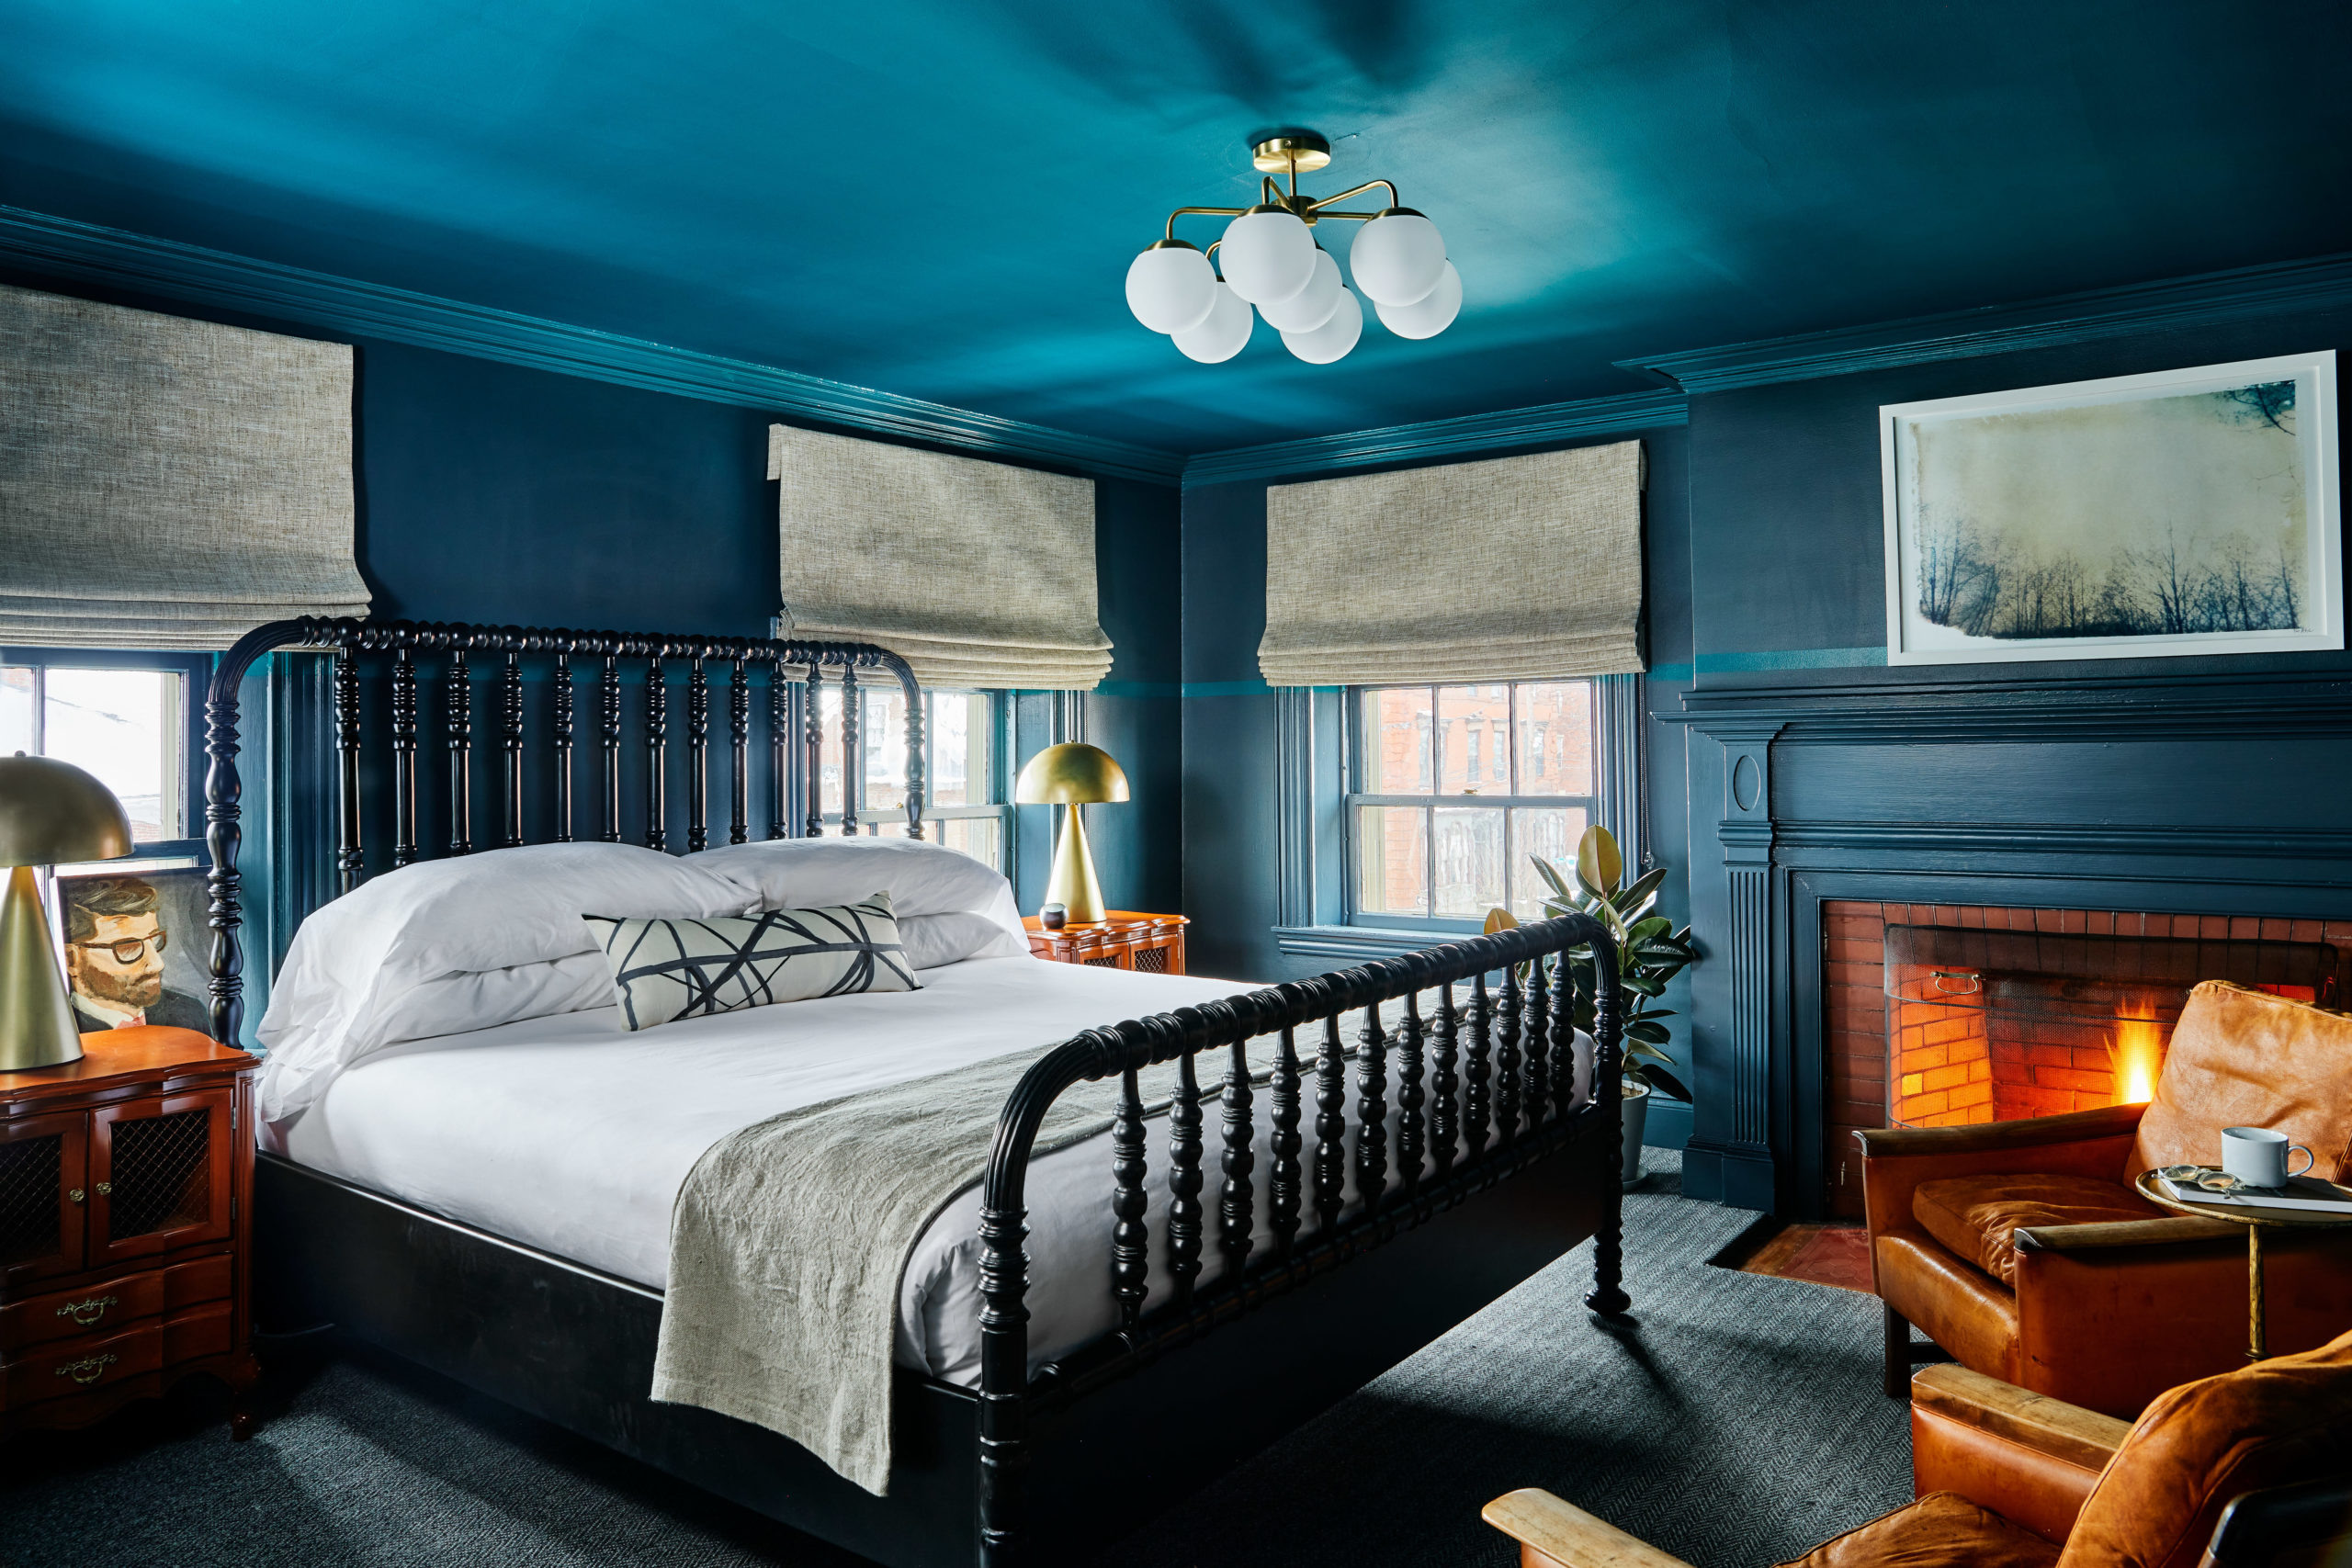 One of the most gorgeous boutique hotels Portland Maine has to offer has walls, ceiling, and fireplace mantle painted the same deep turquoise color, with crisp white linens on the bed and a fire roaring in the fireplace.